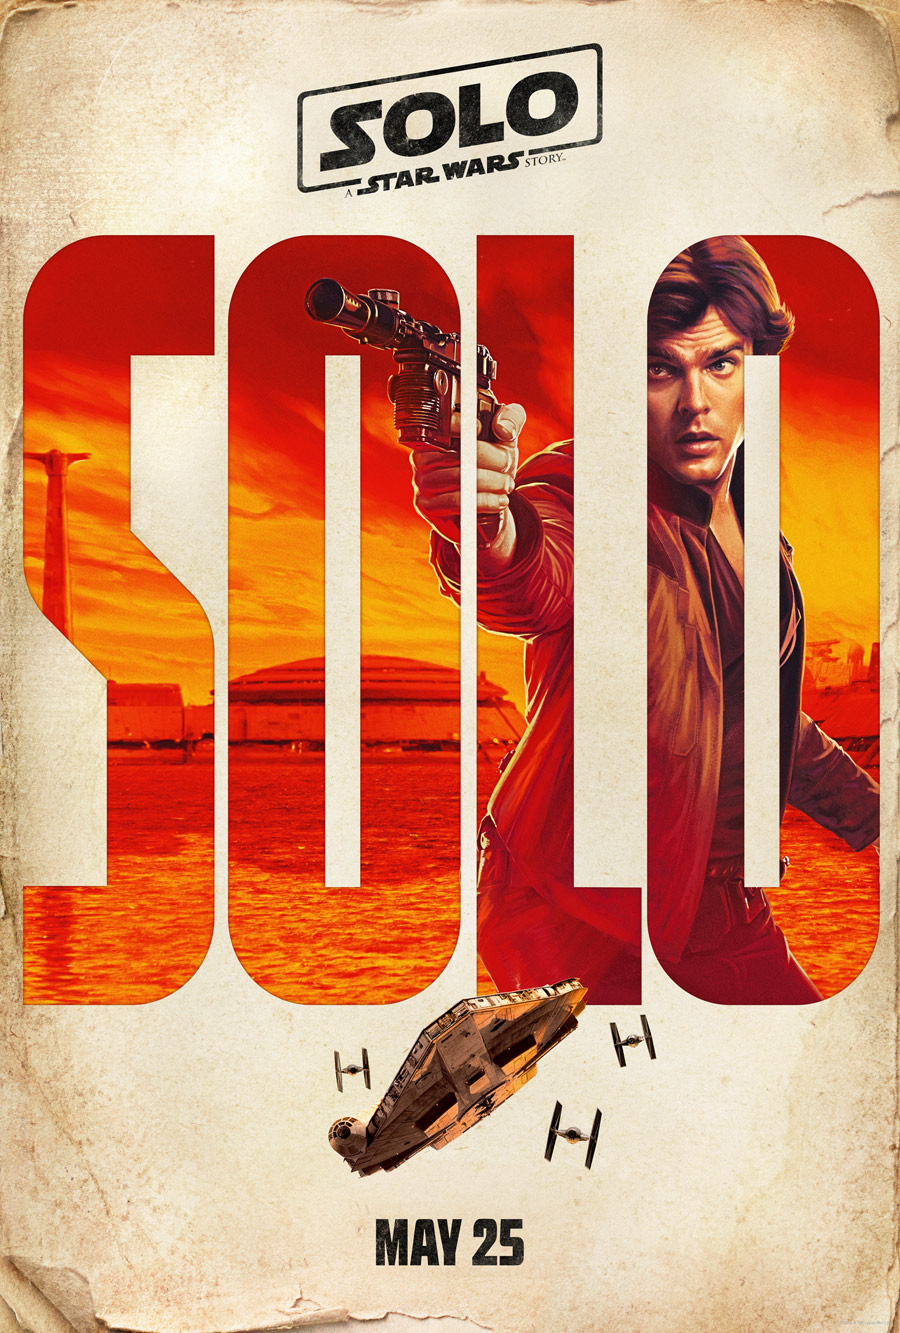 Han Solo character poster